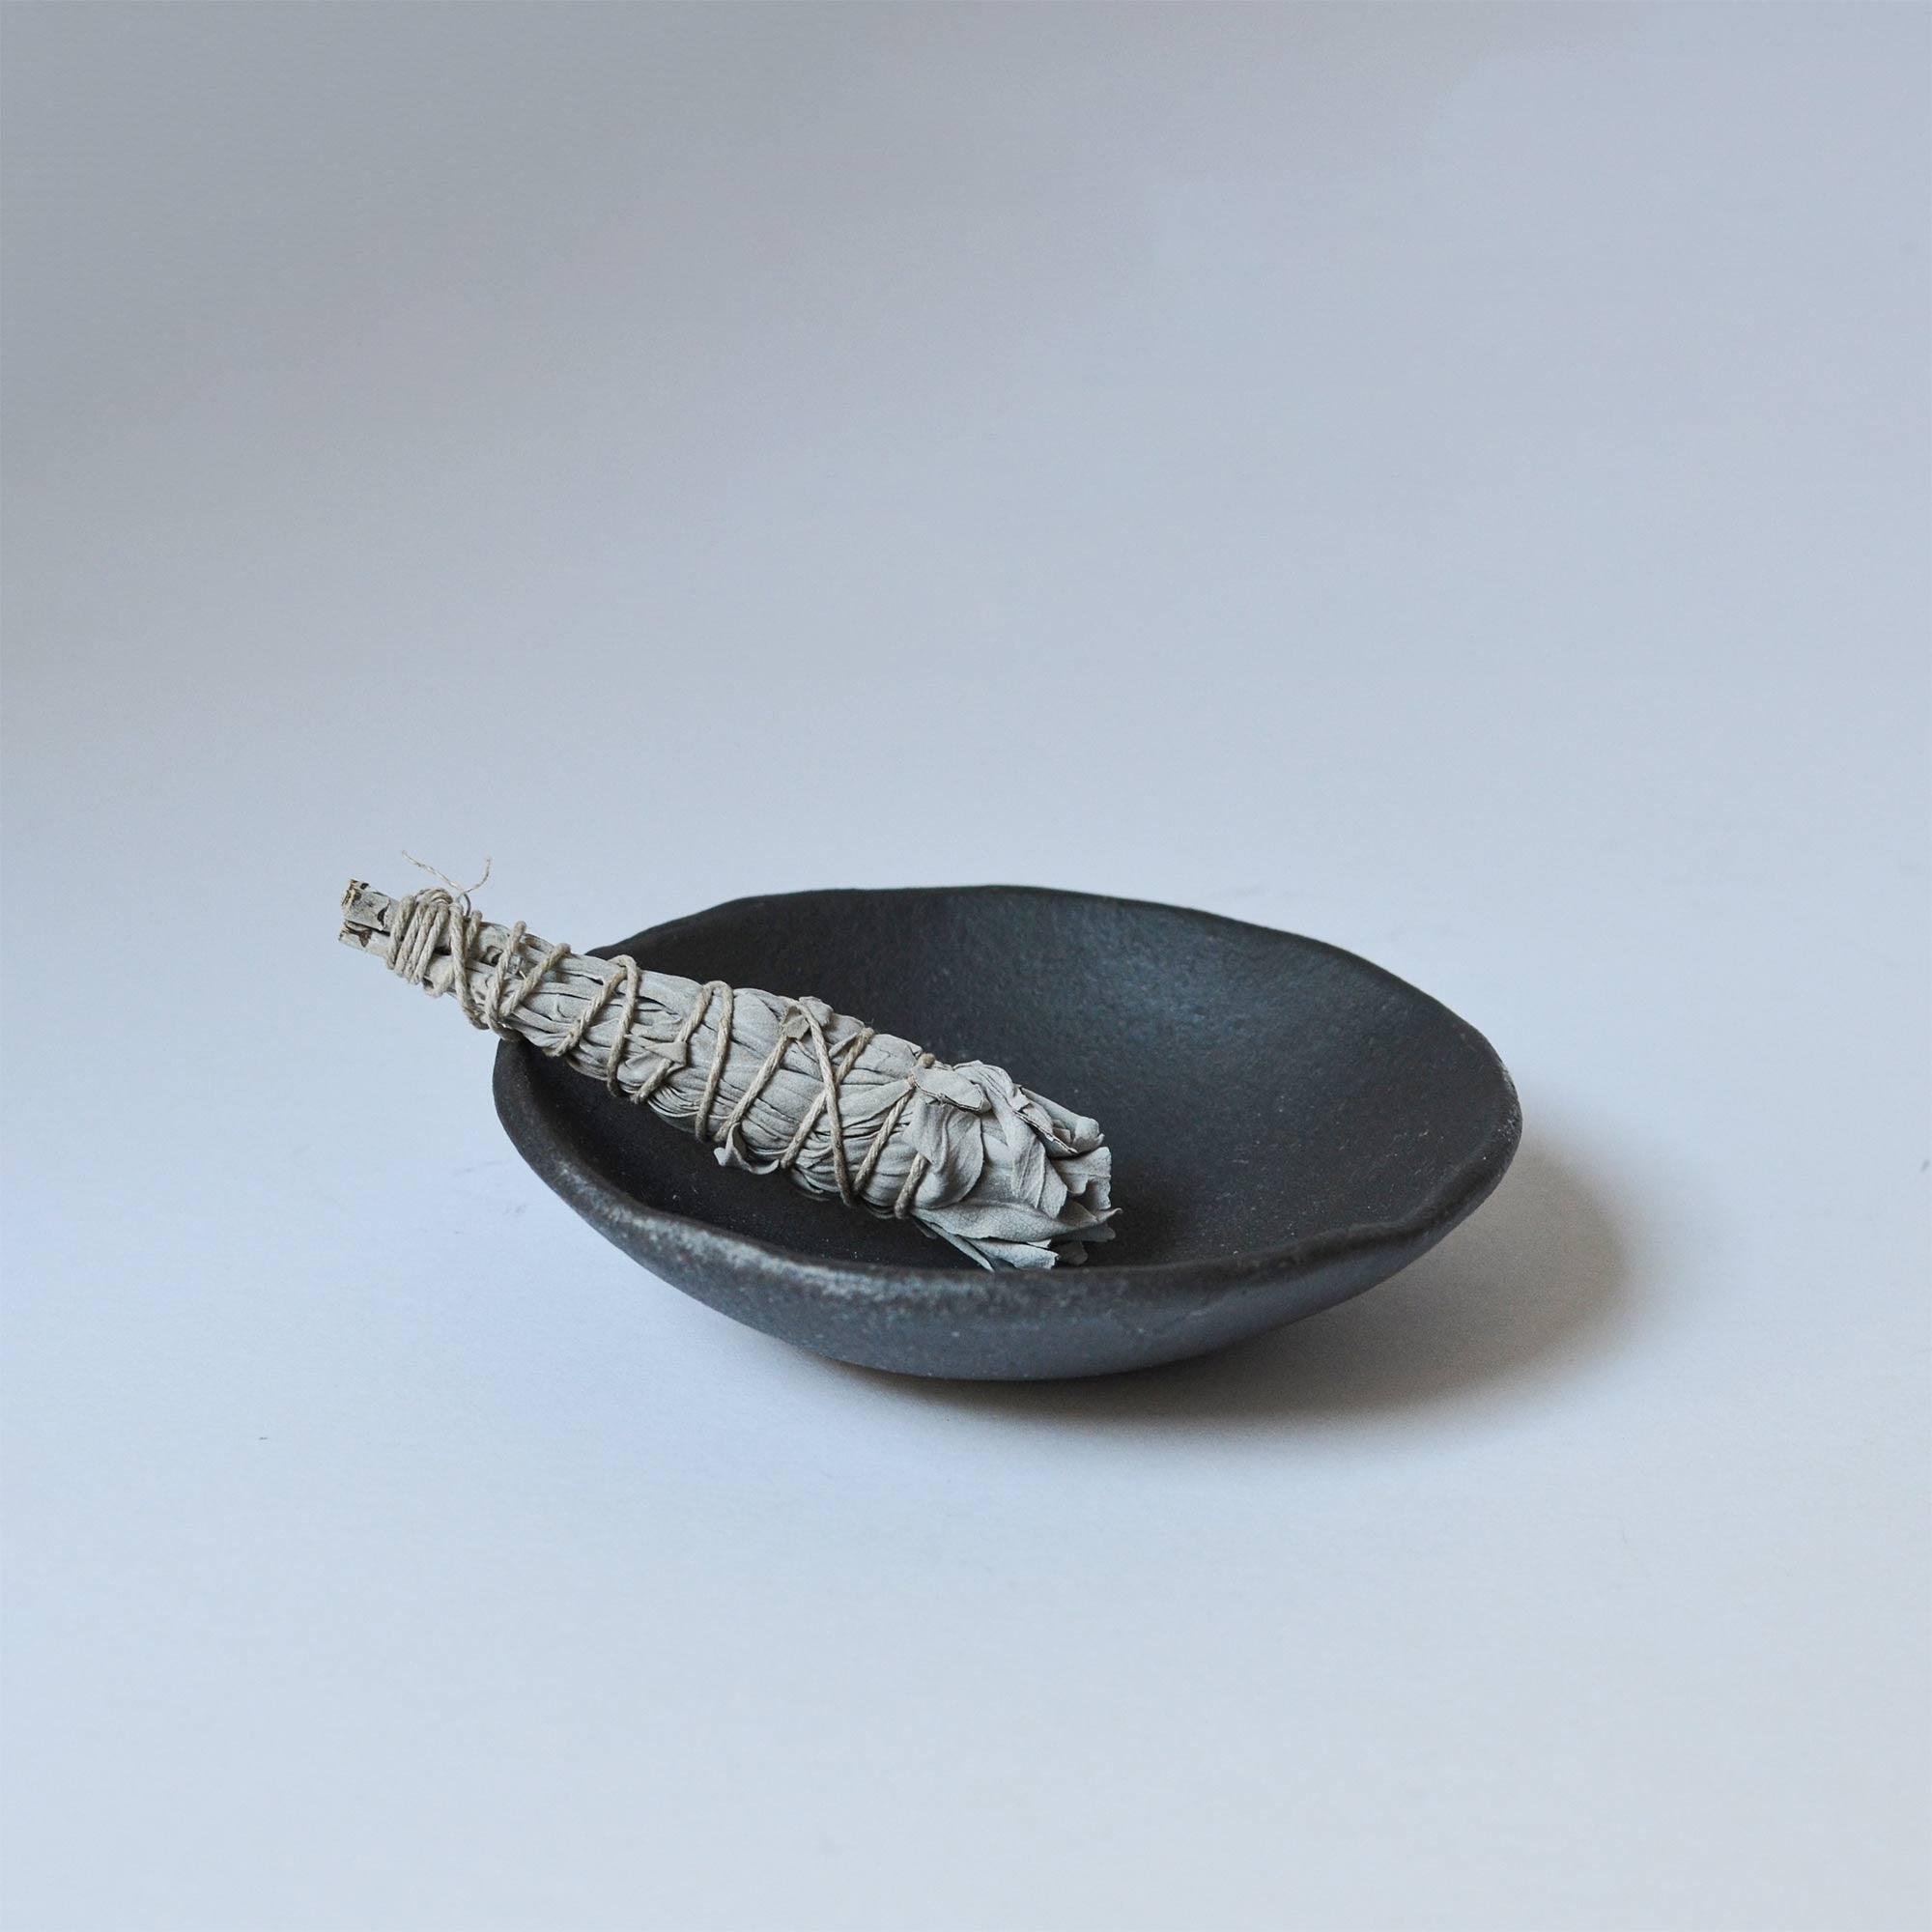 Mini white sage smudge stick on the raw black clay smudging bowl.